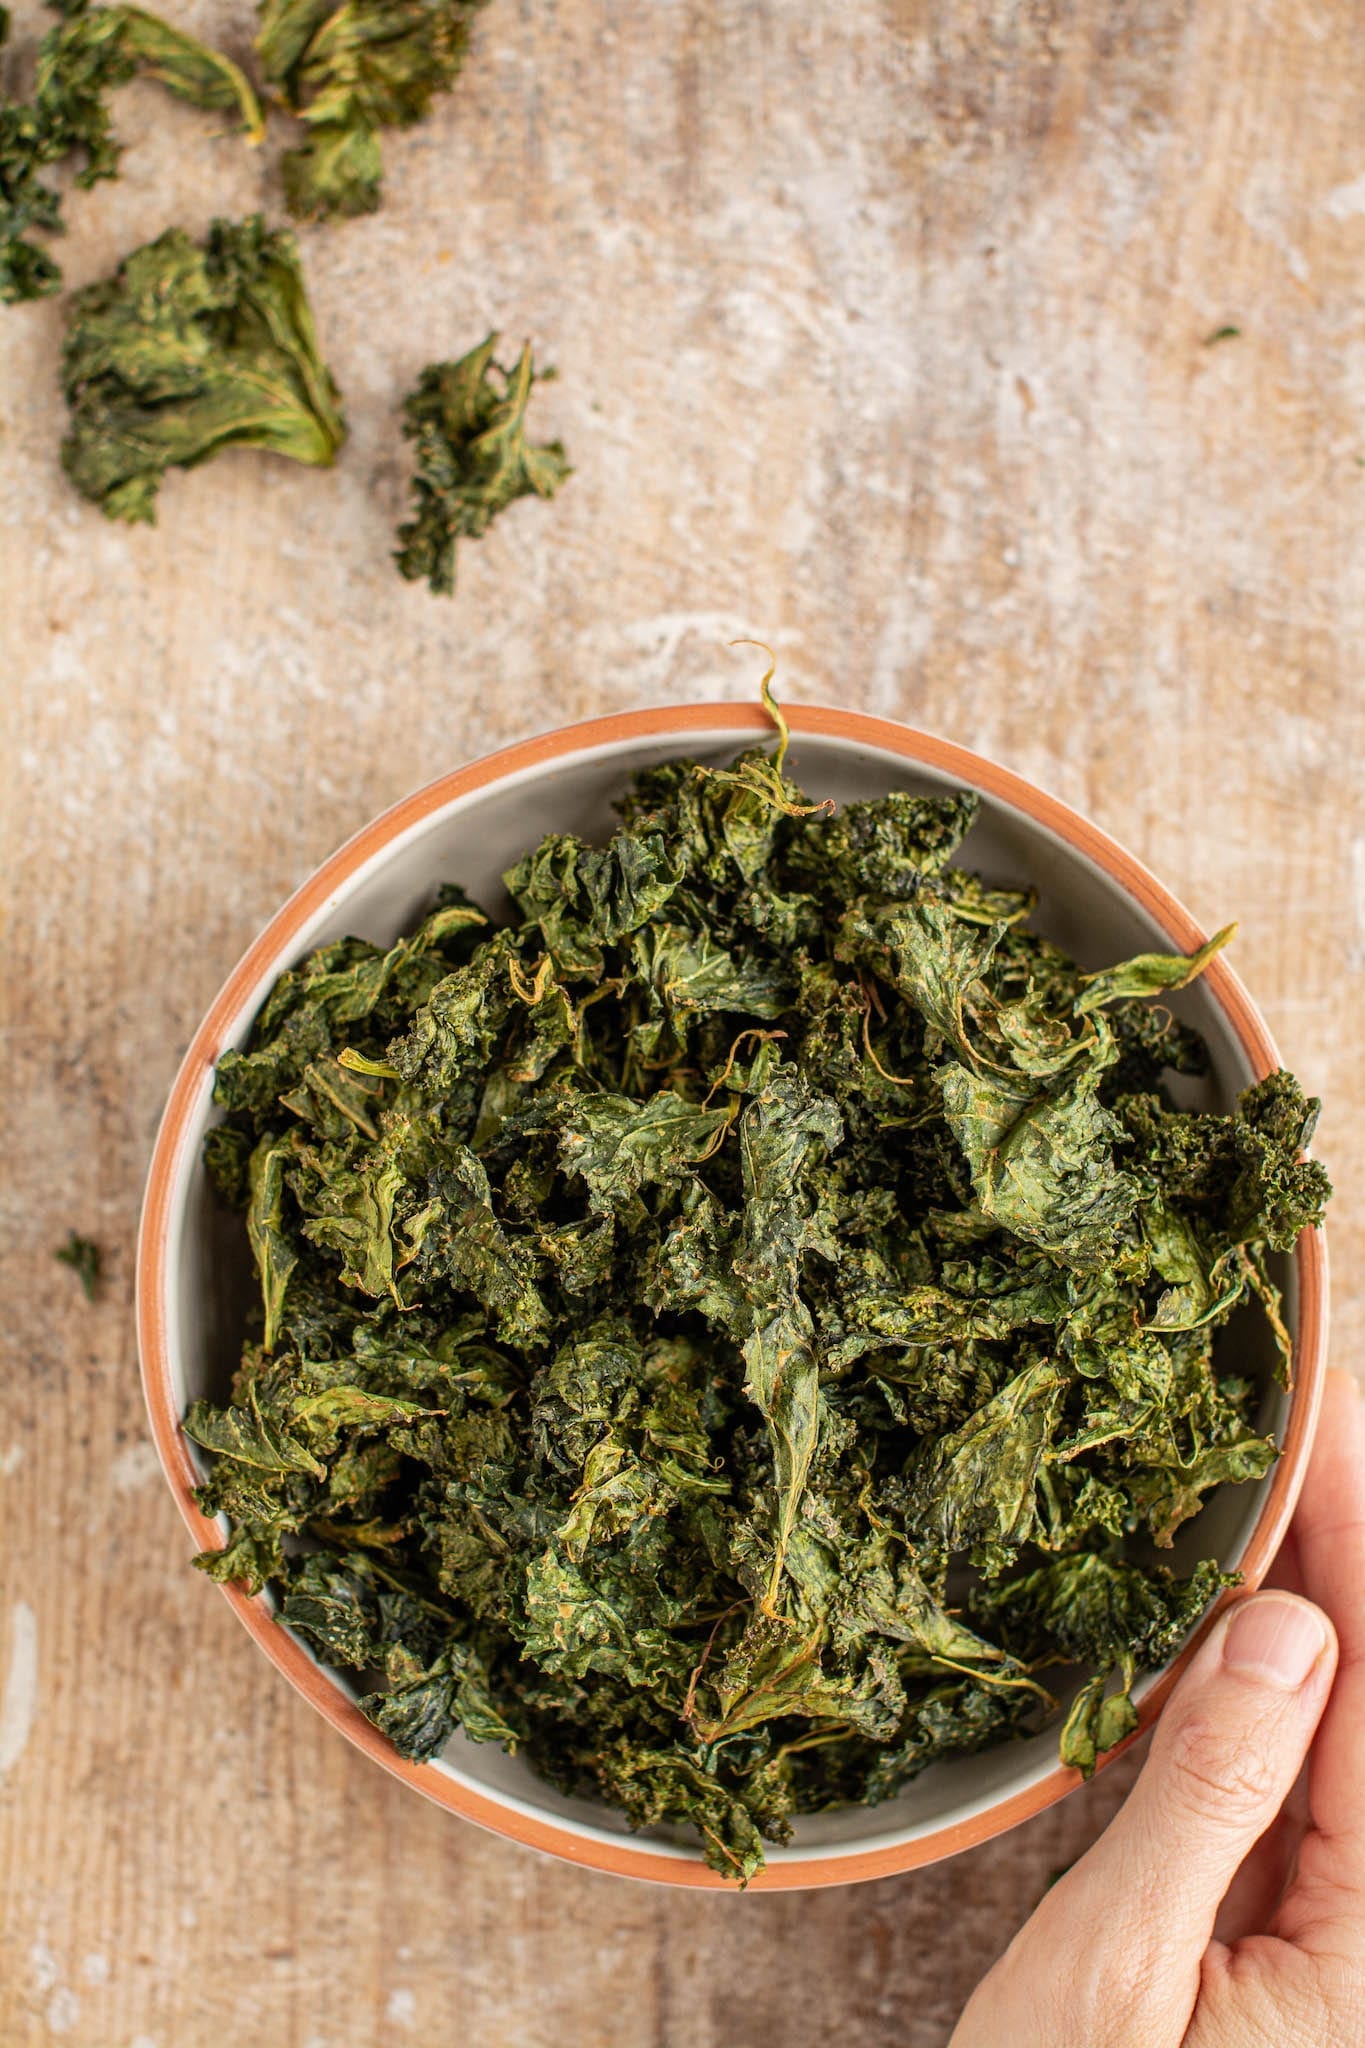 Try those delicious baked kale chips that are also oil-free. It’s a great recipe for a healthy snack instead of potato chips for when you crave something crispy and a bit salty.